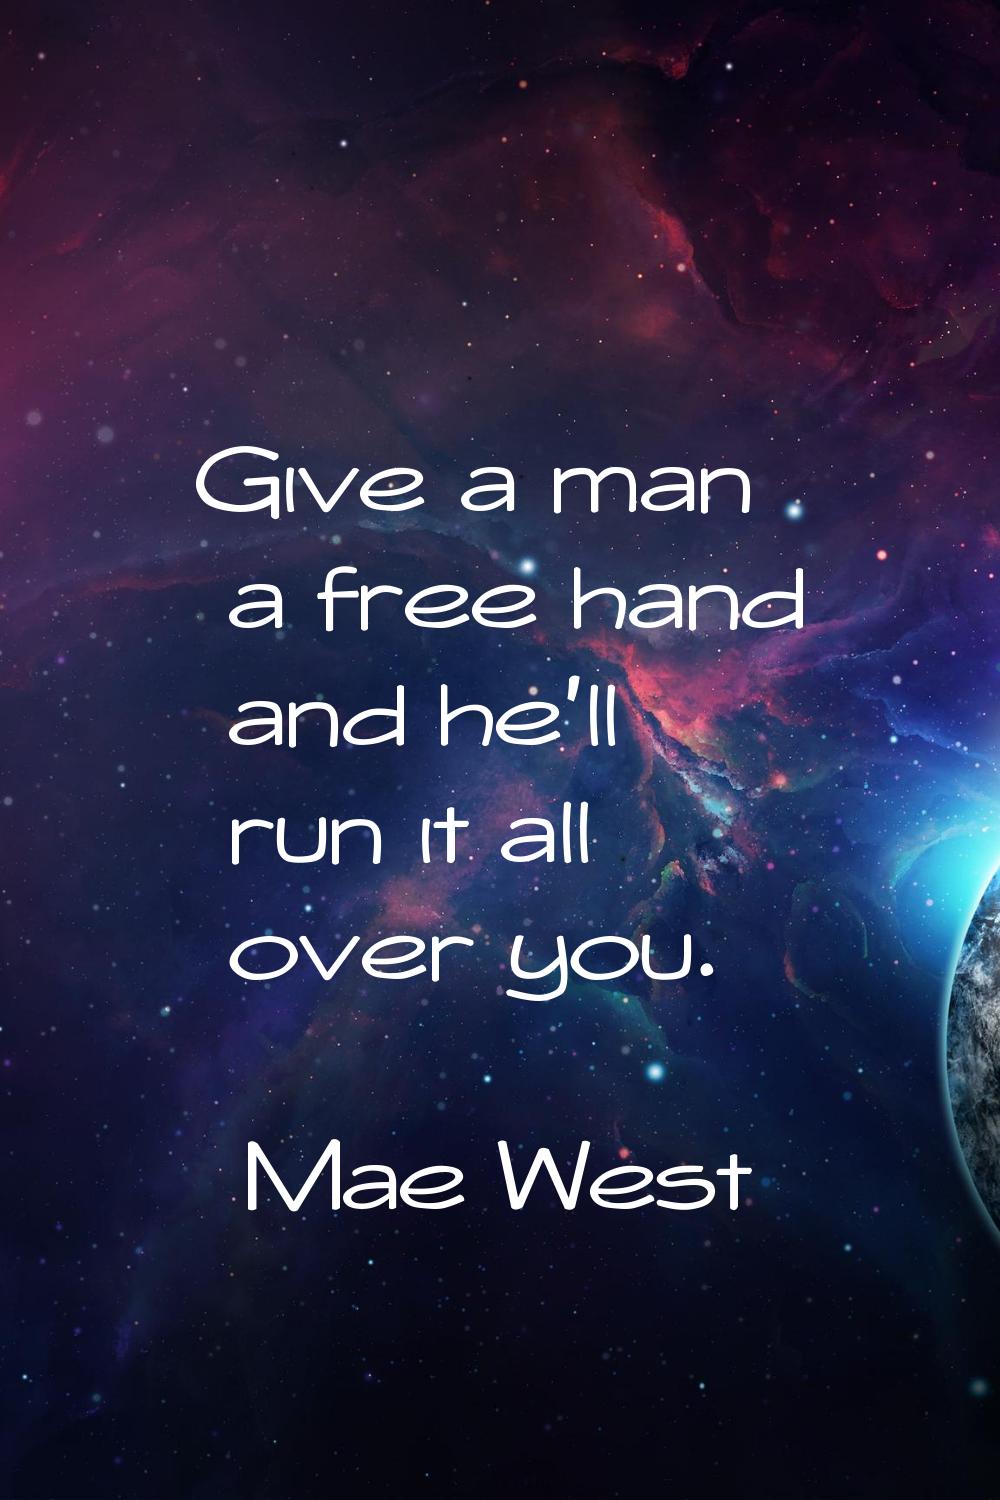 Give a man a free hand and he'll run it all over you.